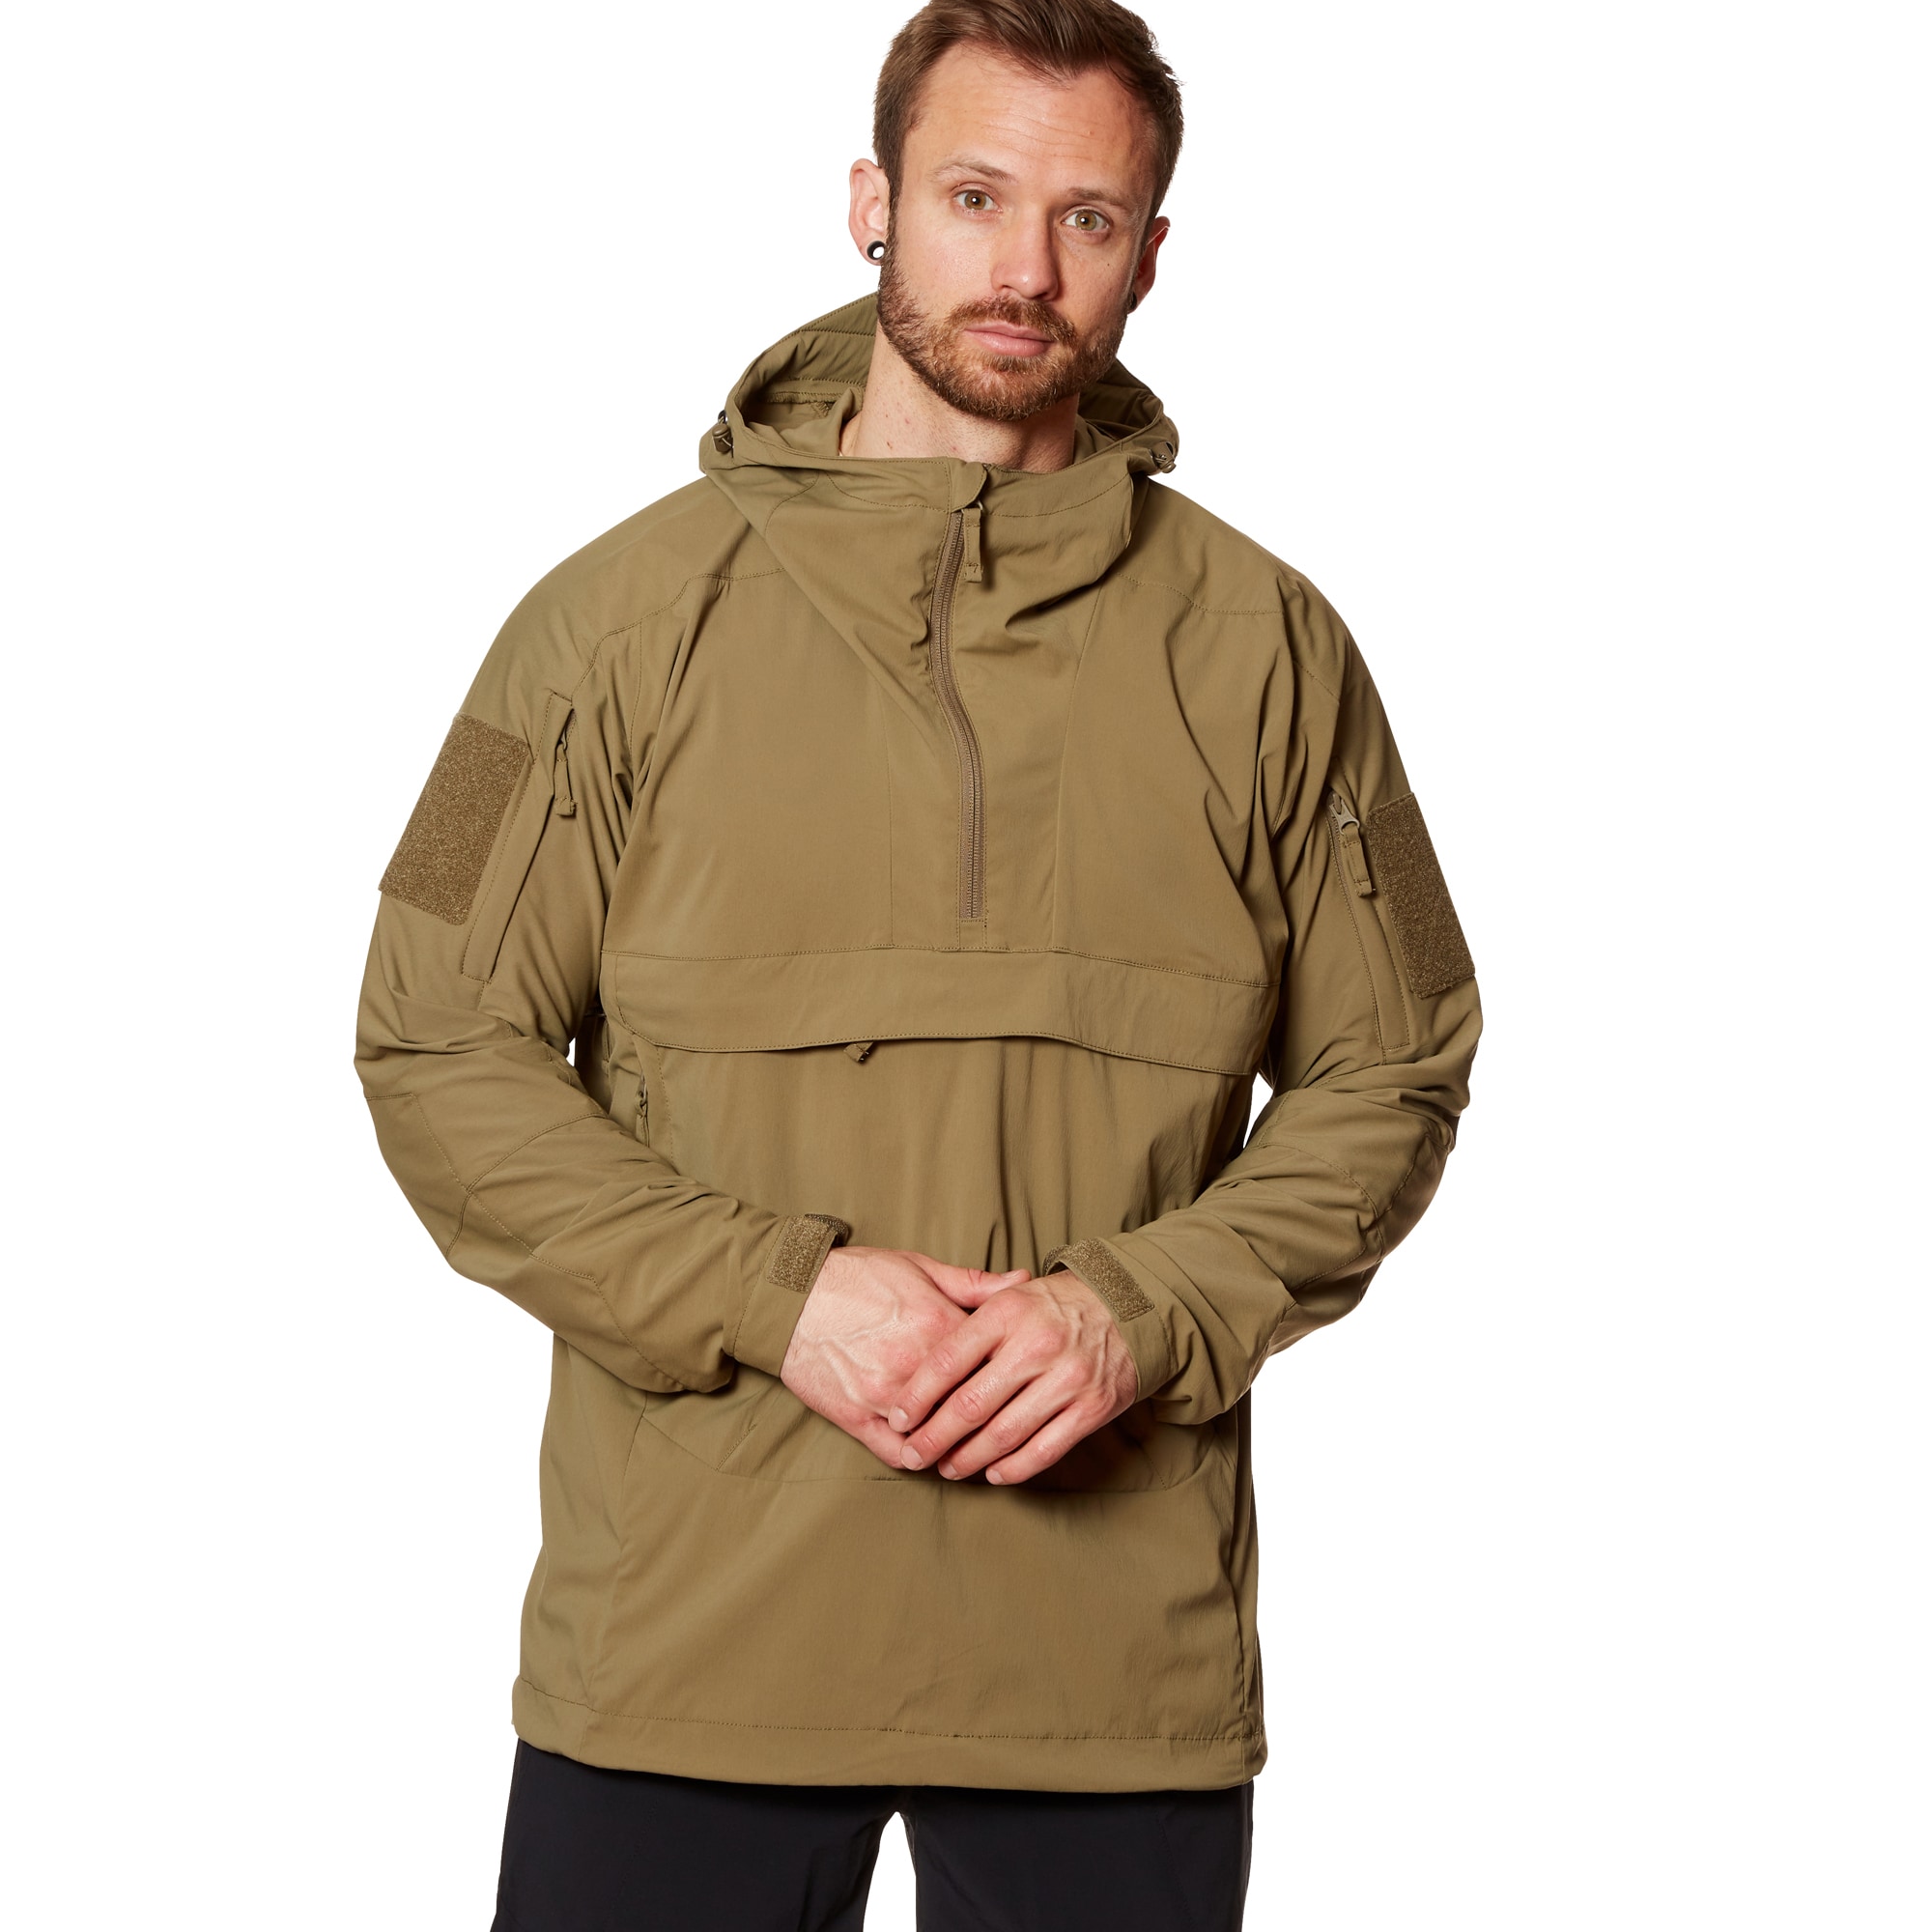 Purchase the Helikon-Tex Mistral Anorak Jacket adaptive green by